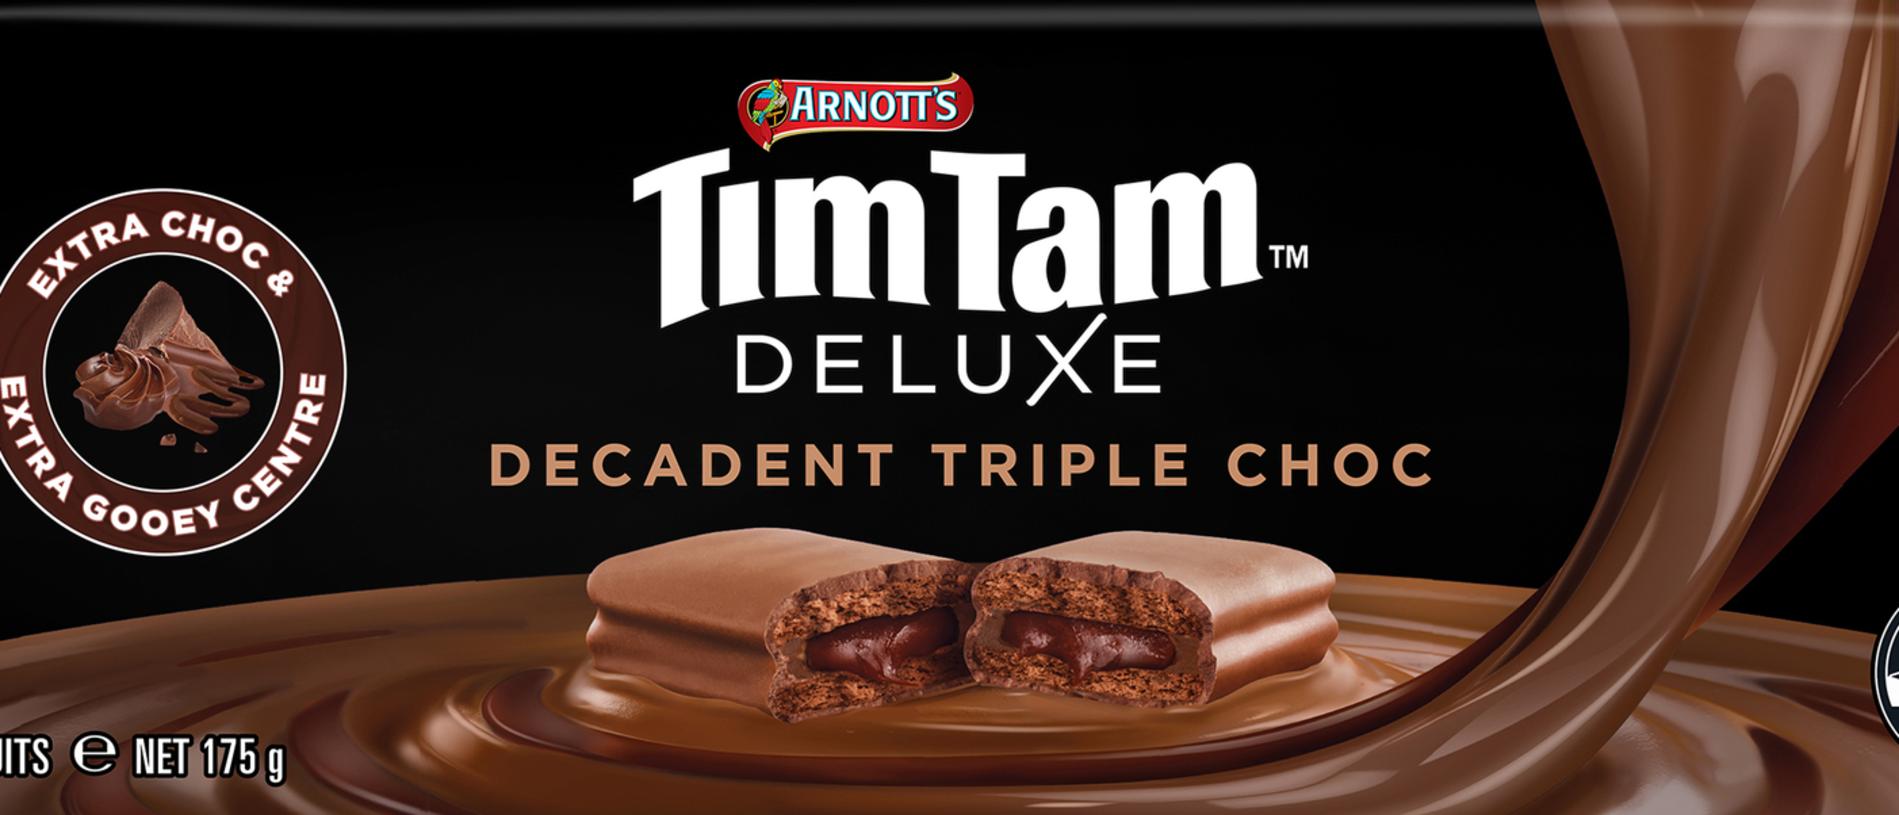 Arnott’s has revealed the first of its six new Tim Tam flavours that will hit stores early next year.